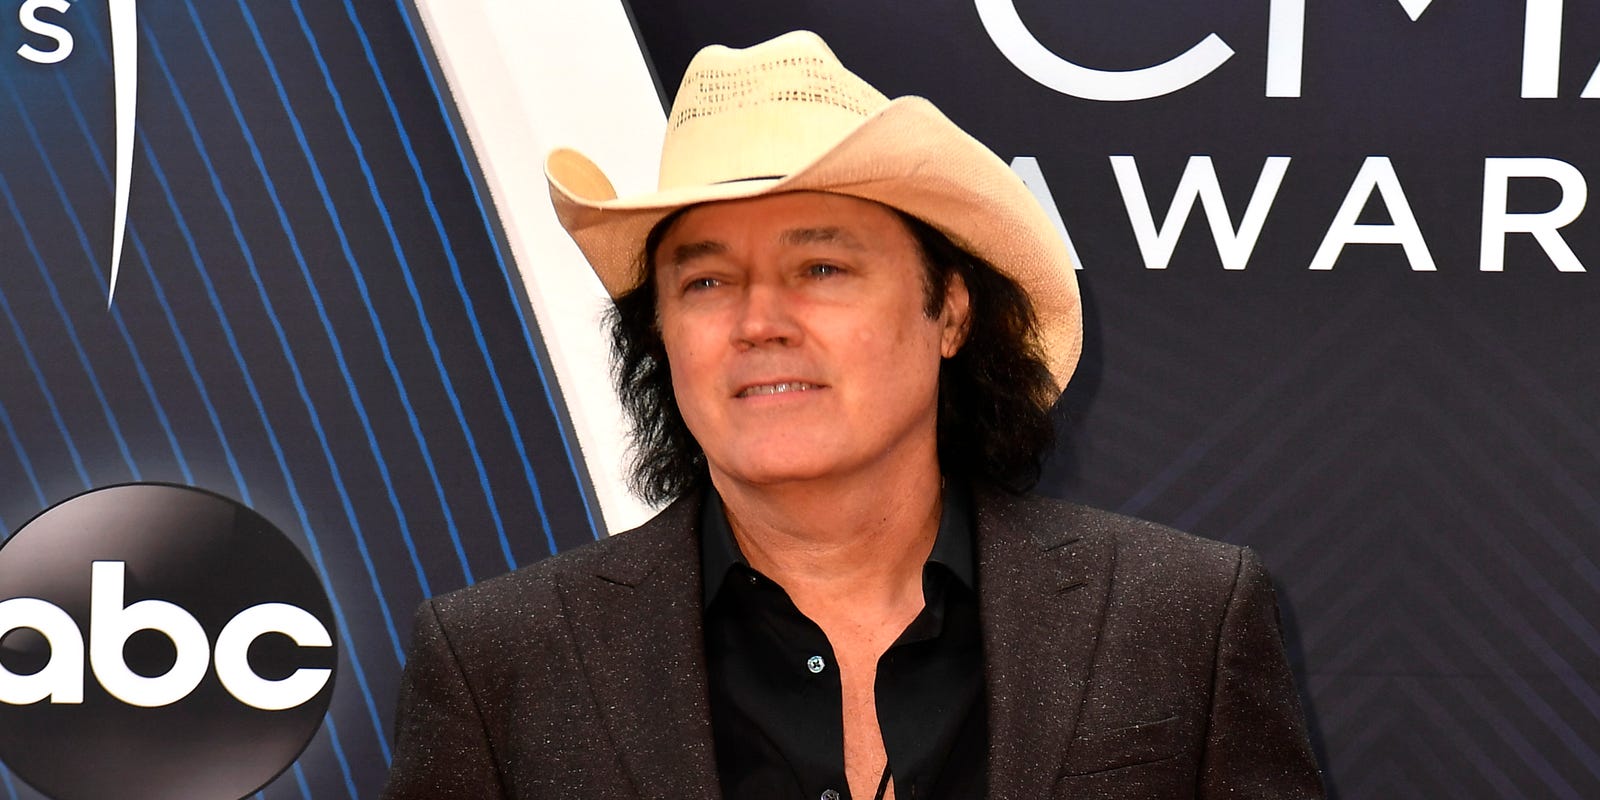 David Lee Murphy reignites '90s country